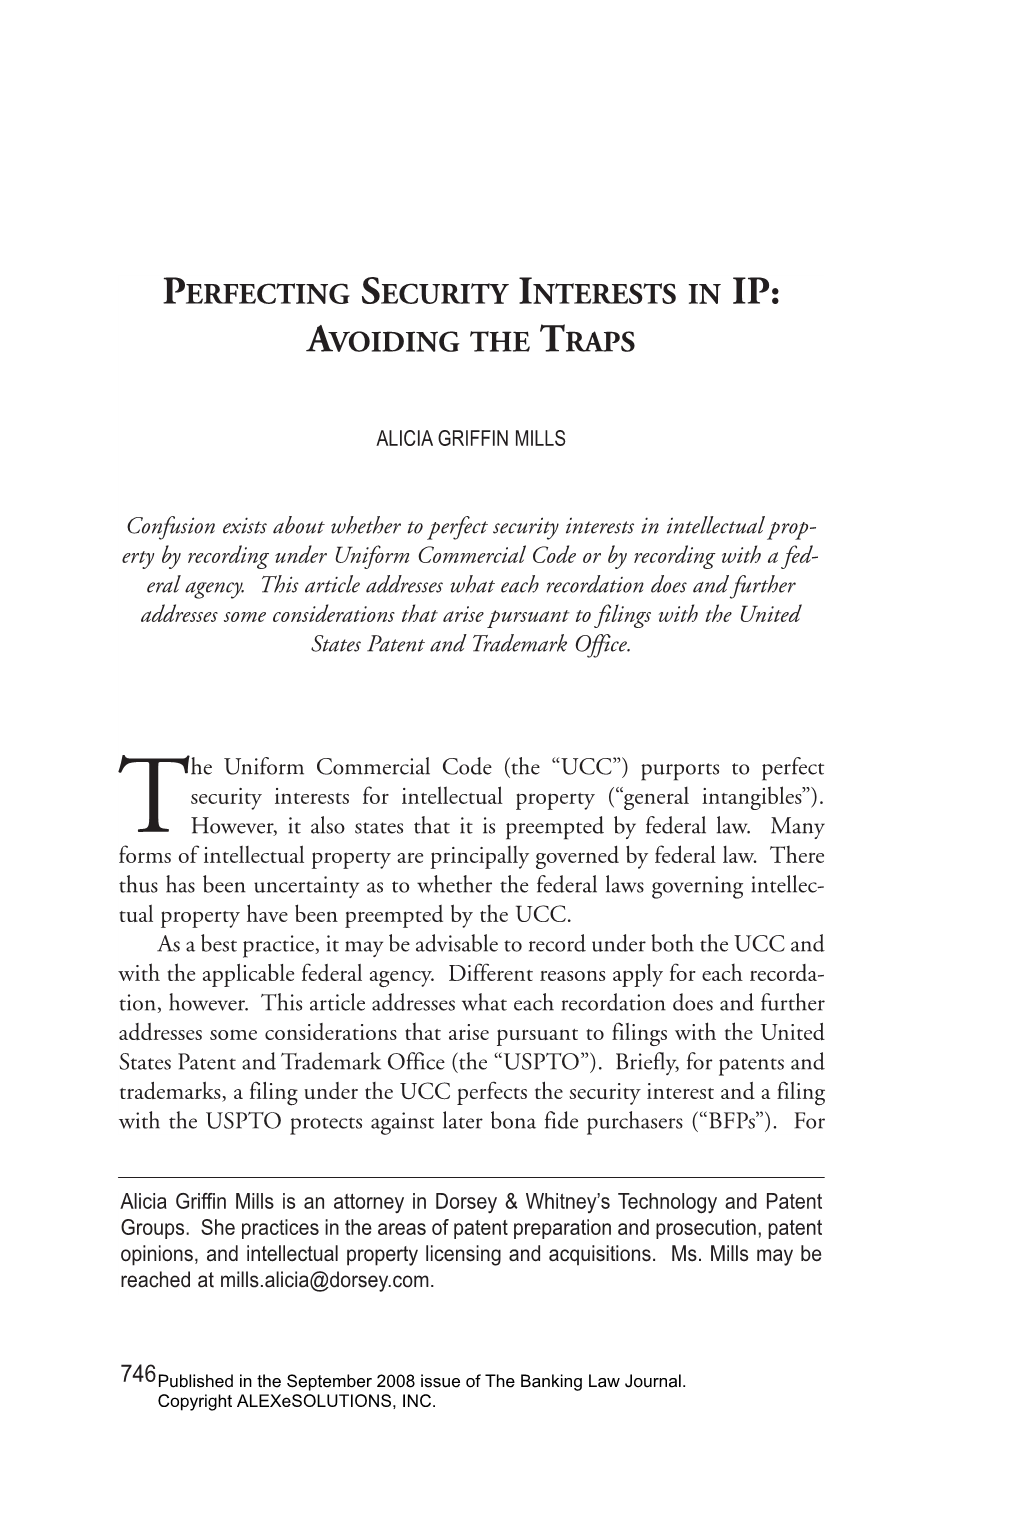 Perfecting Security Interests in Ip: Avoiding the Traps